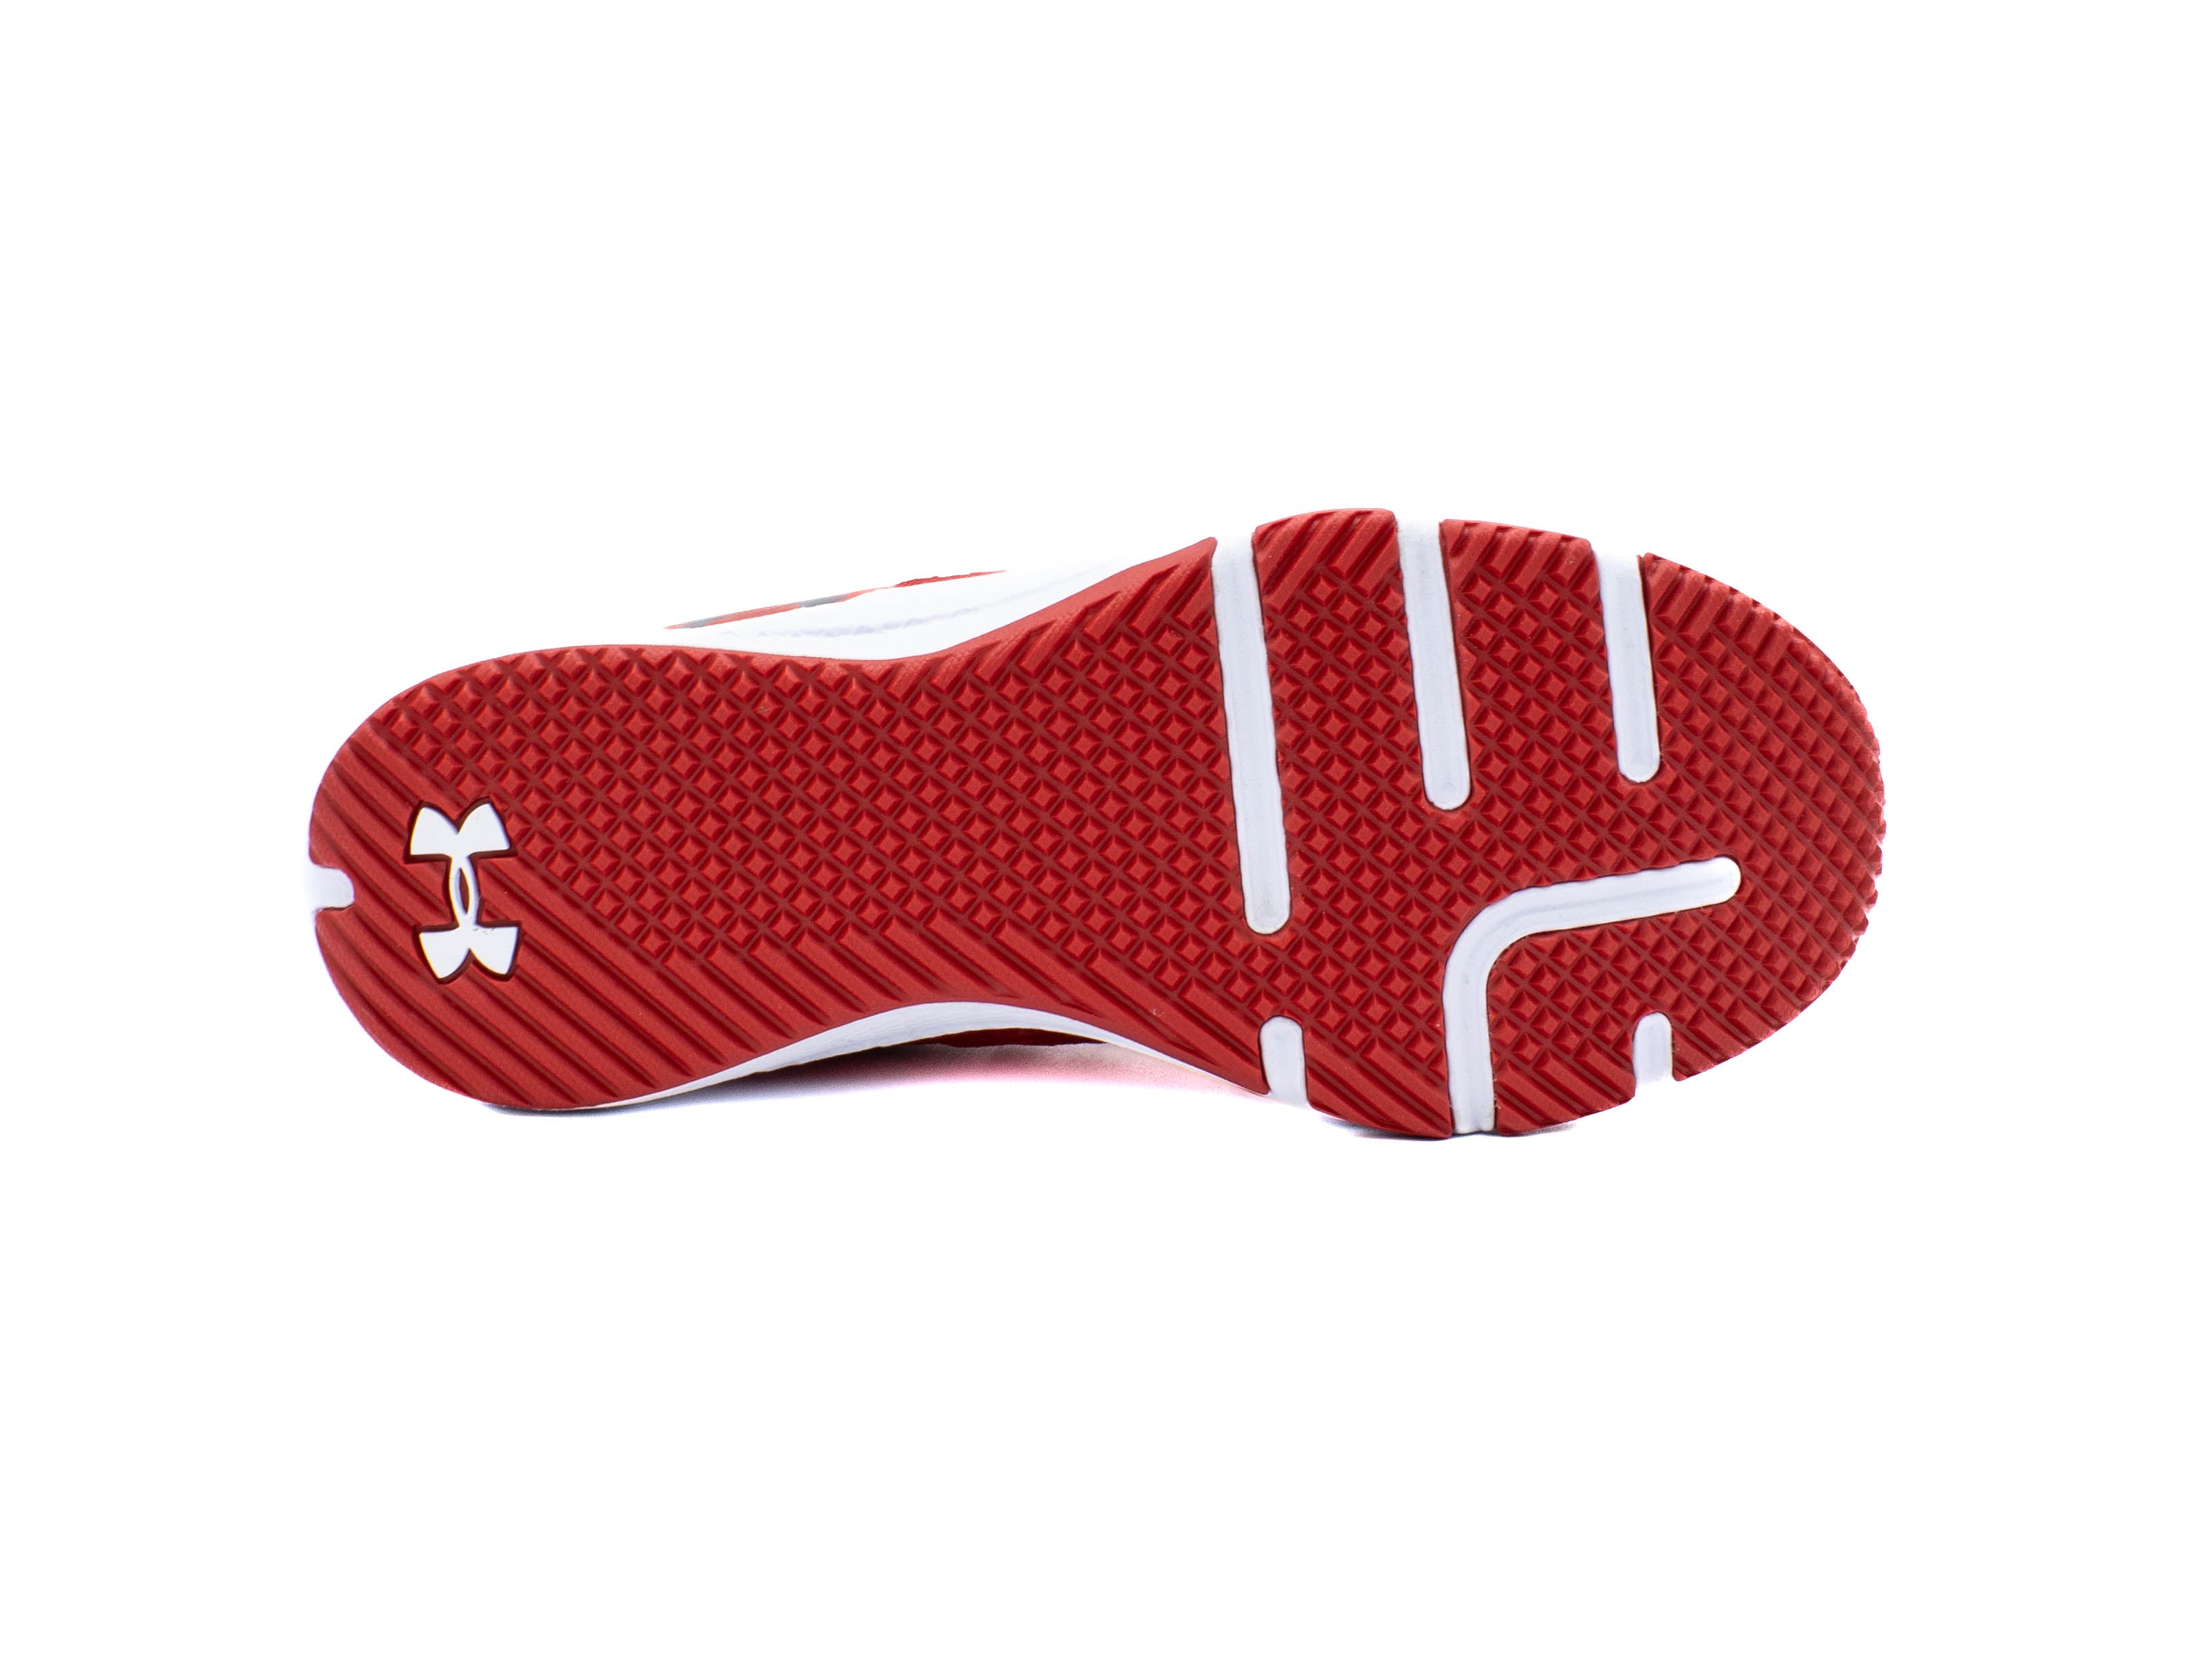 UNDER ARMOUR Charged Engage 2